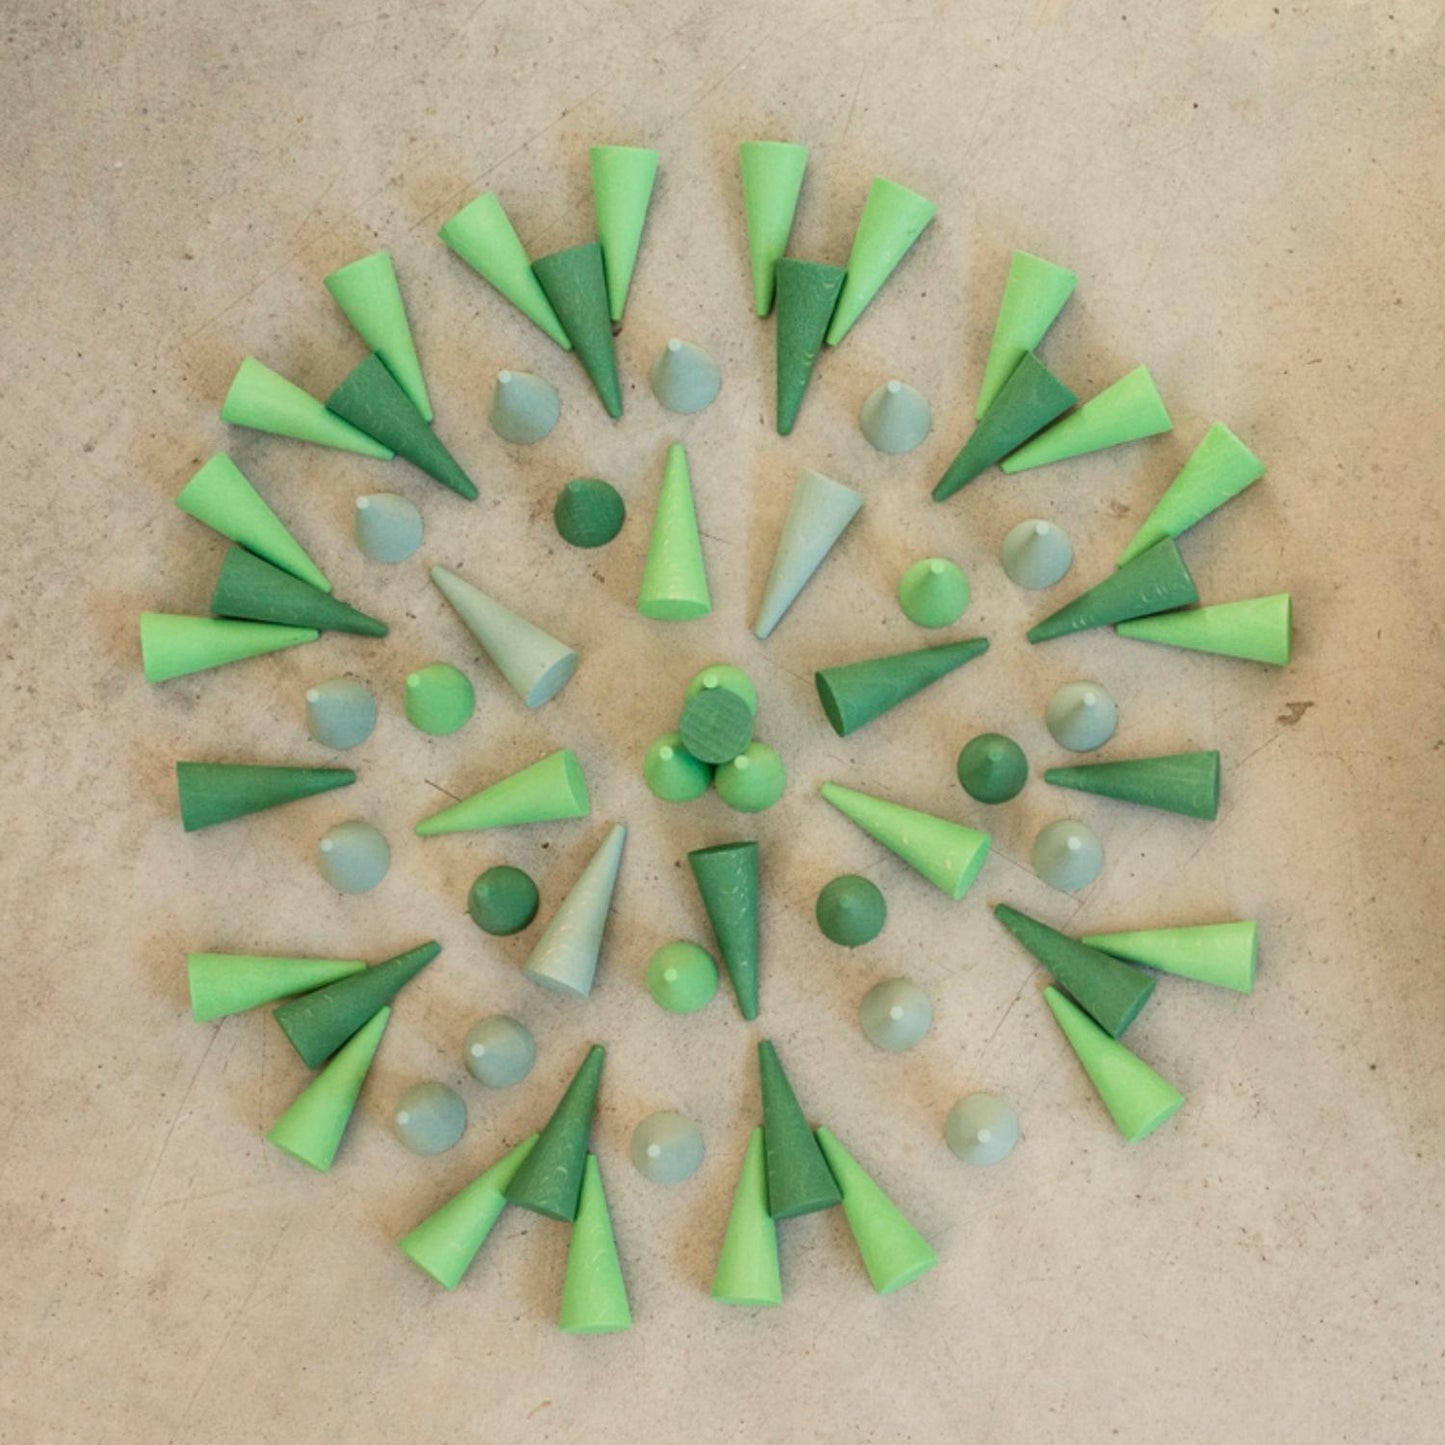 Mandala Green Cones | 36 Pieces | Wooden Toys for Kids | Open-Ended Play